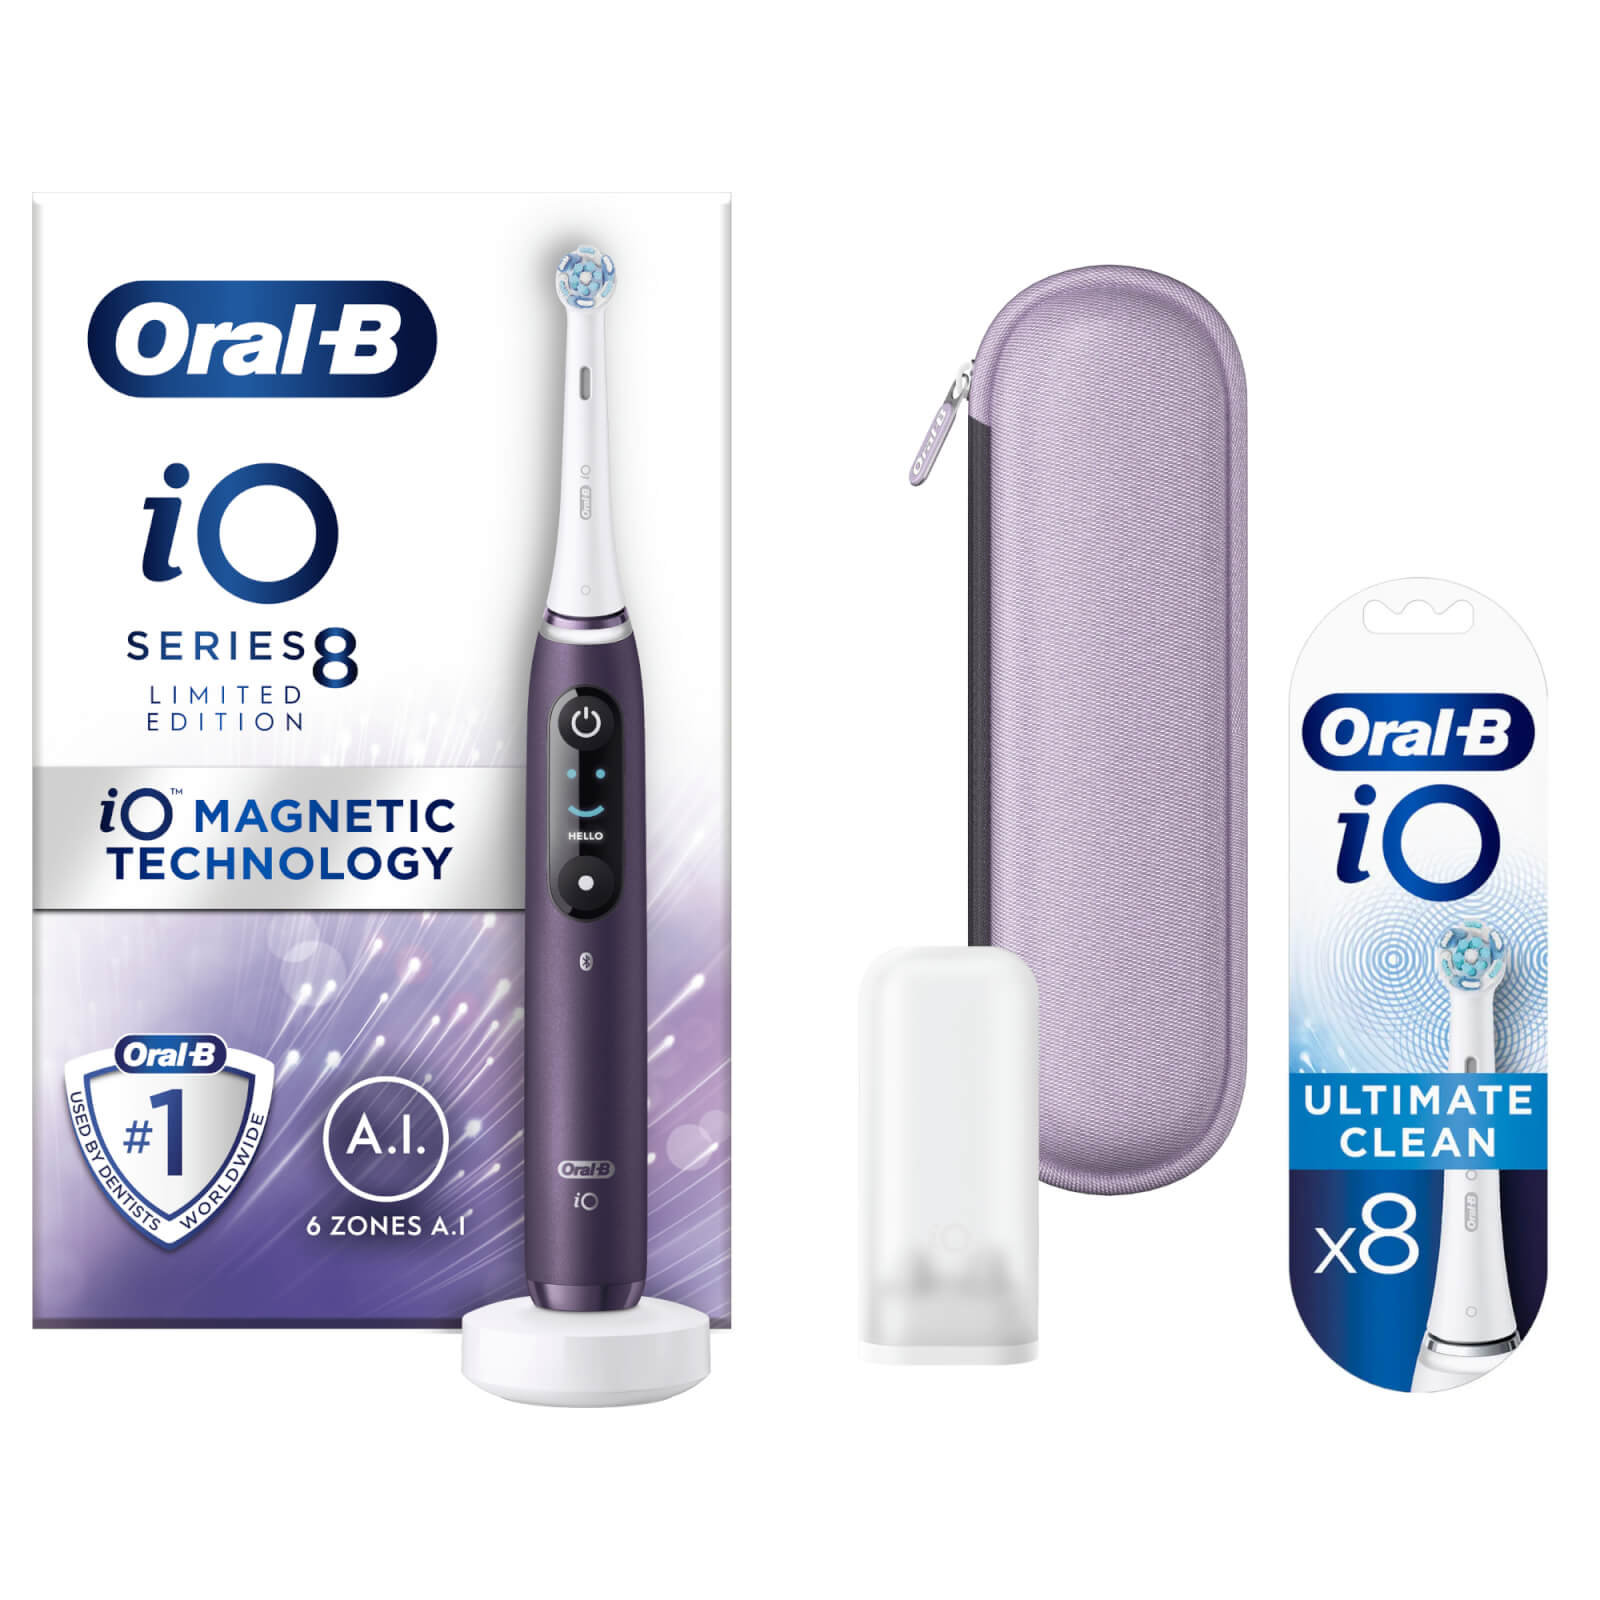 Oral B iO8 Violet Electric Toothbrush with Zipper Case - Toothbrush + 8 Refills